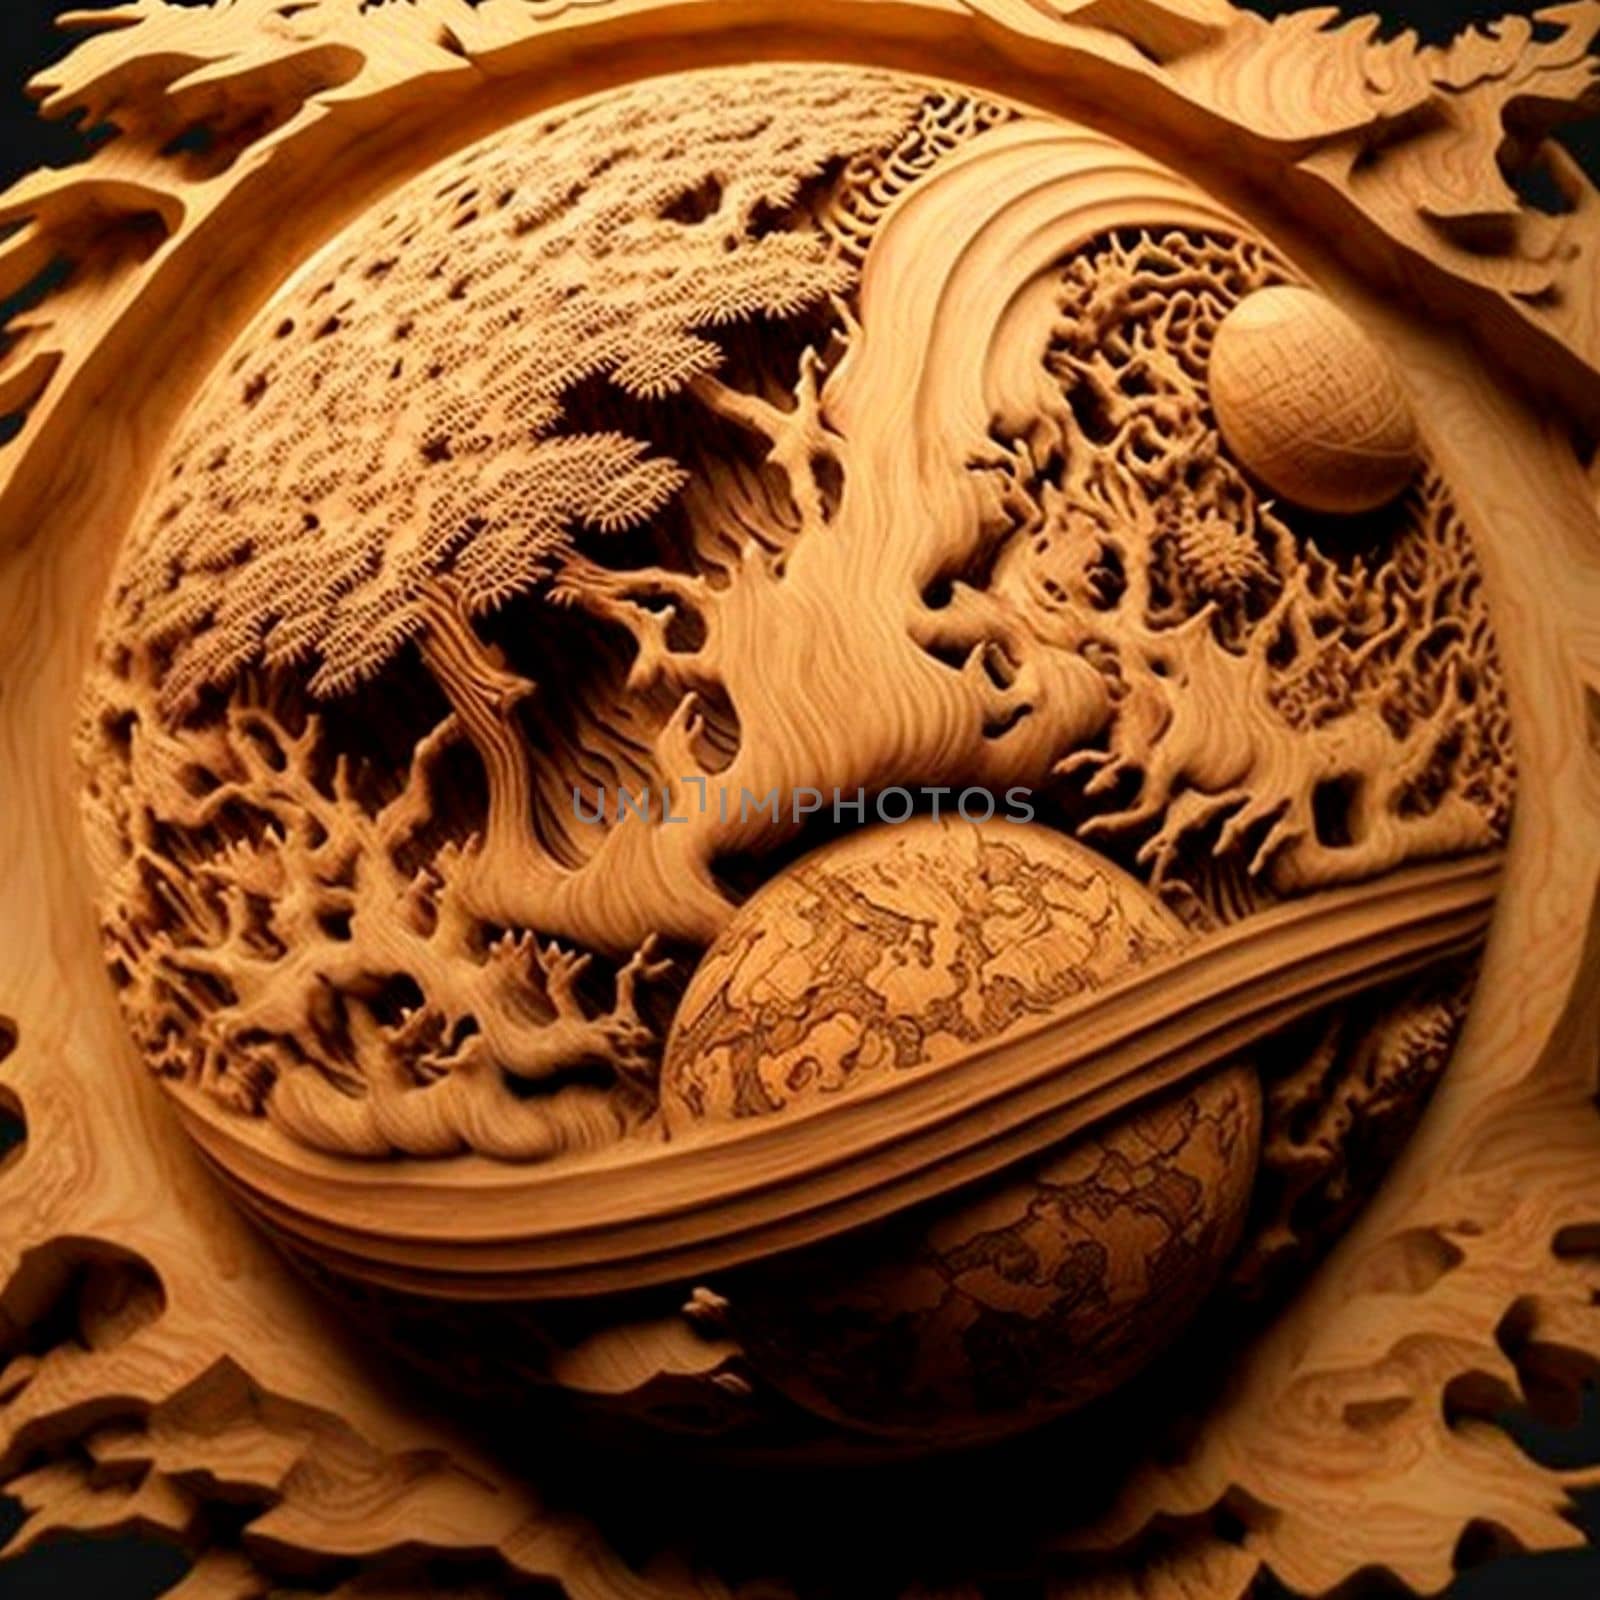 Planet Earth with reservoirs and continents carved out of wood by NeuroSky